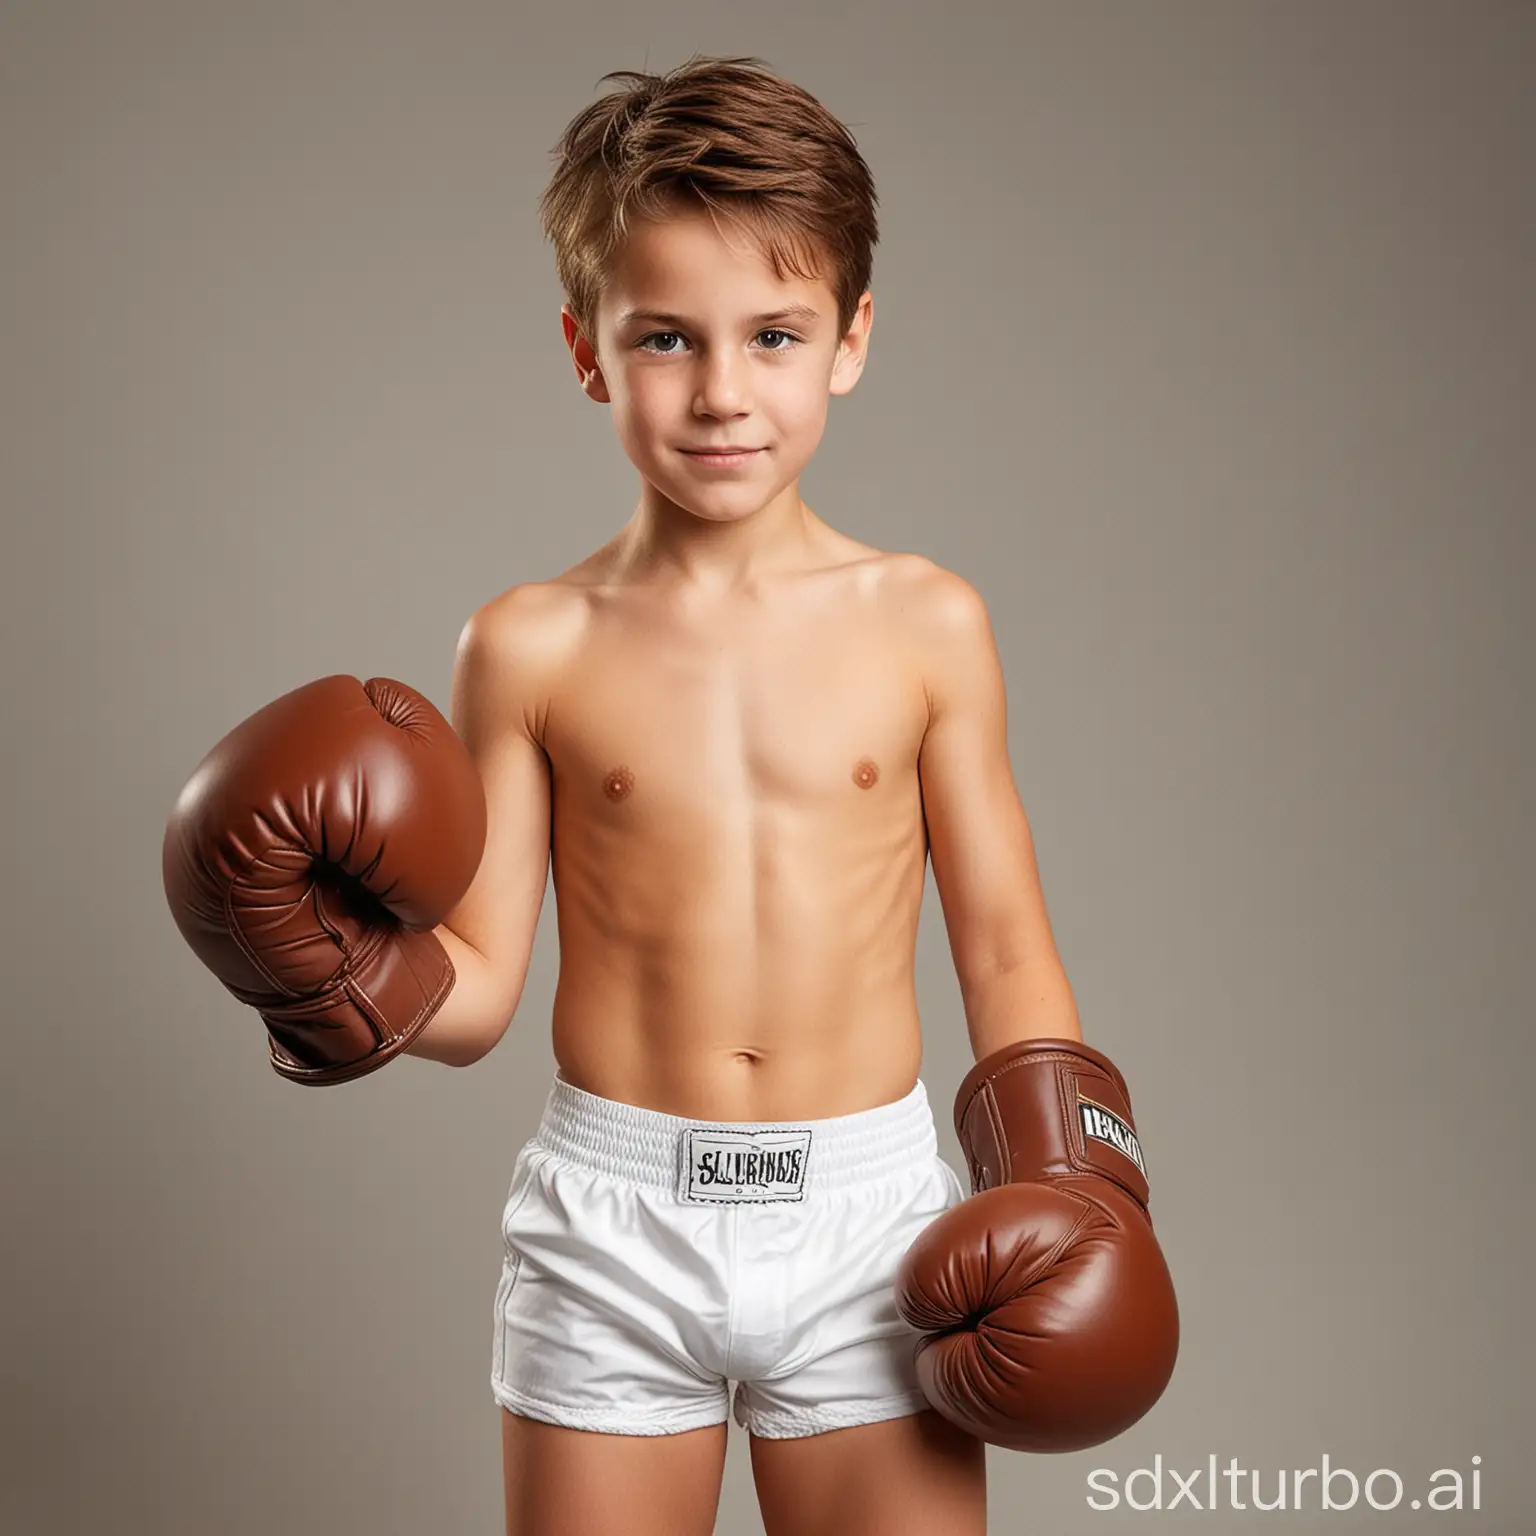 Young-Shirtless-Boy-in-White-Trunks-with-Large-Brown-Boxing-Gloves